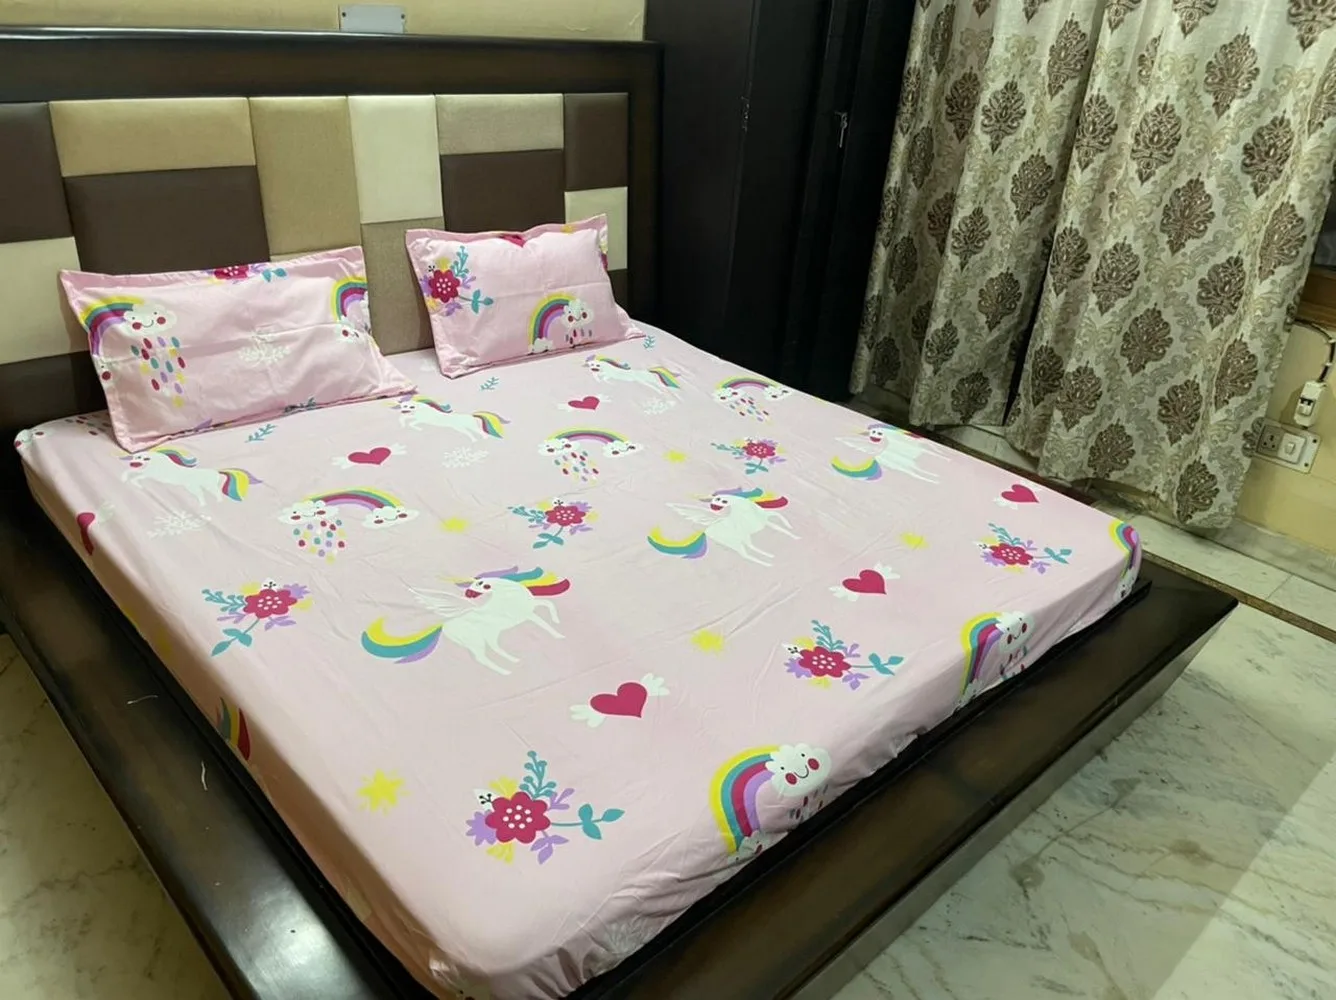 Bedsheet printed, Fitted, Elastic Corner, 90x100, Glace Cotton, 2 Pillow Covers, pink unicorn design